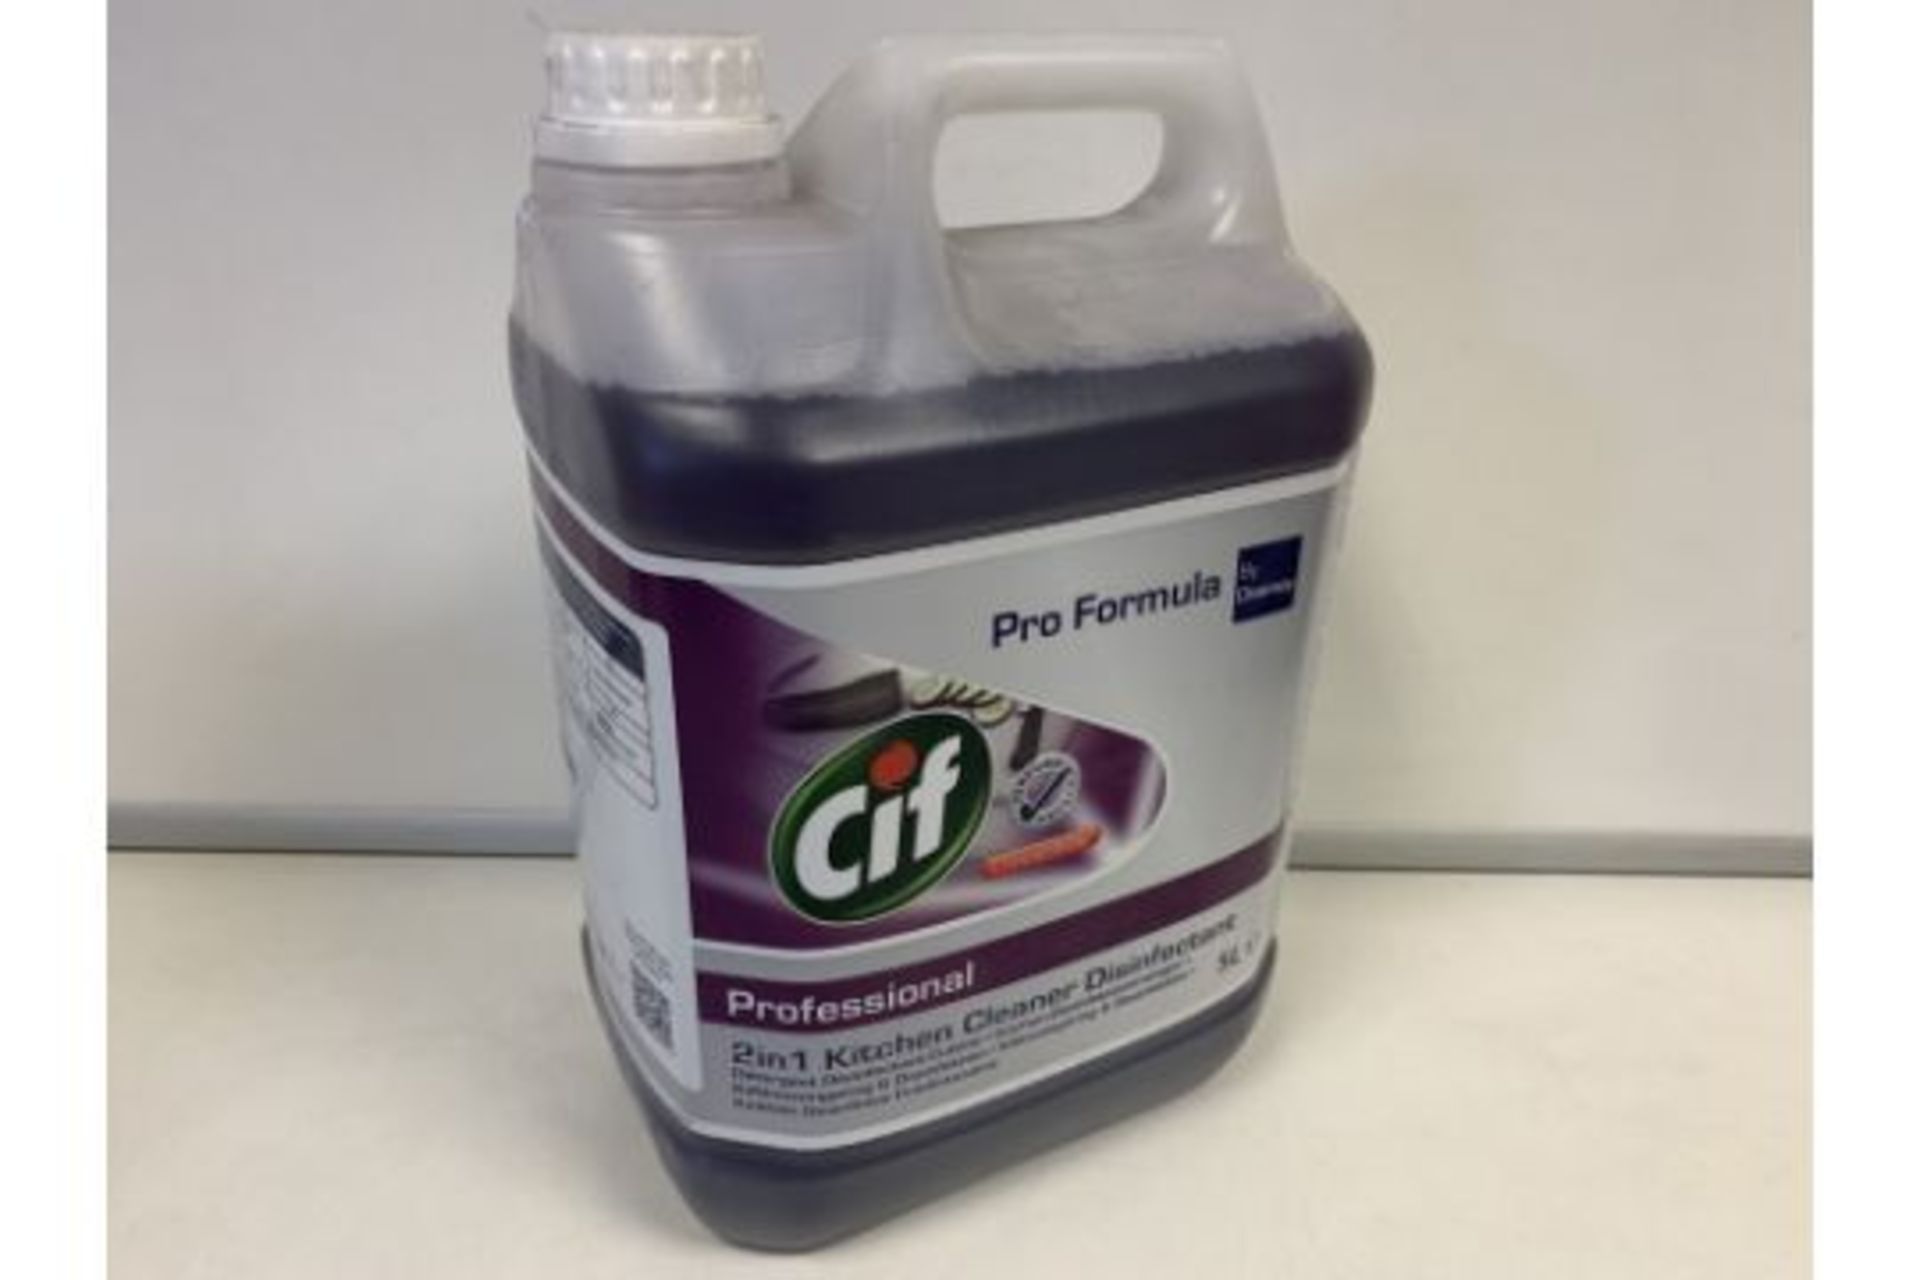 10 X BRAND NEW BOXED CIF PRO FORMULA PROFESSIONAL 2 IN 1 KITCHEN CLEANER DISINFECTANTS 5L